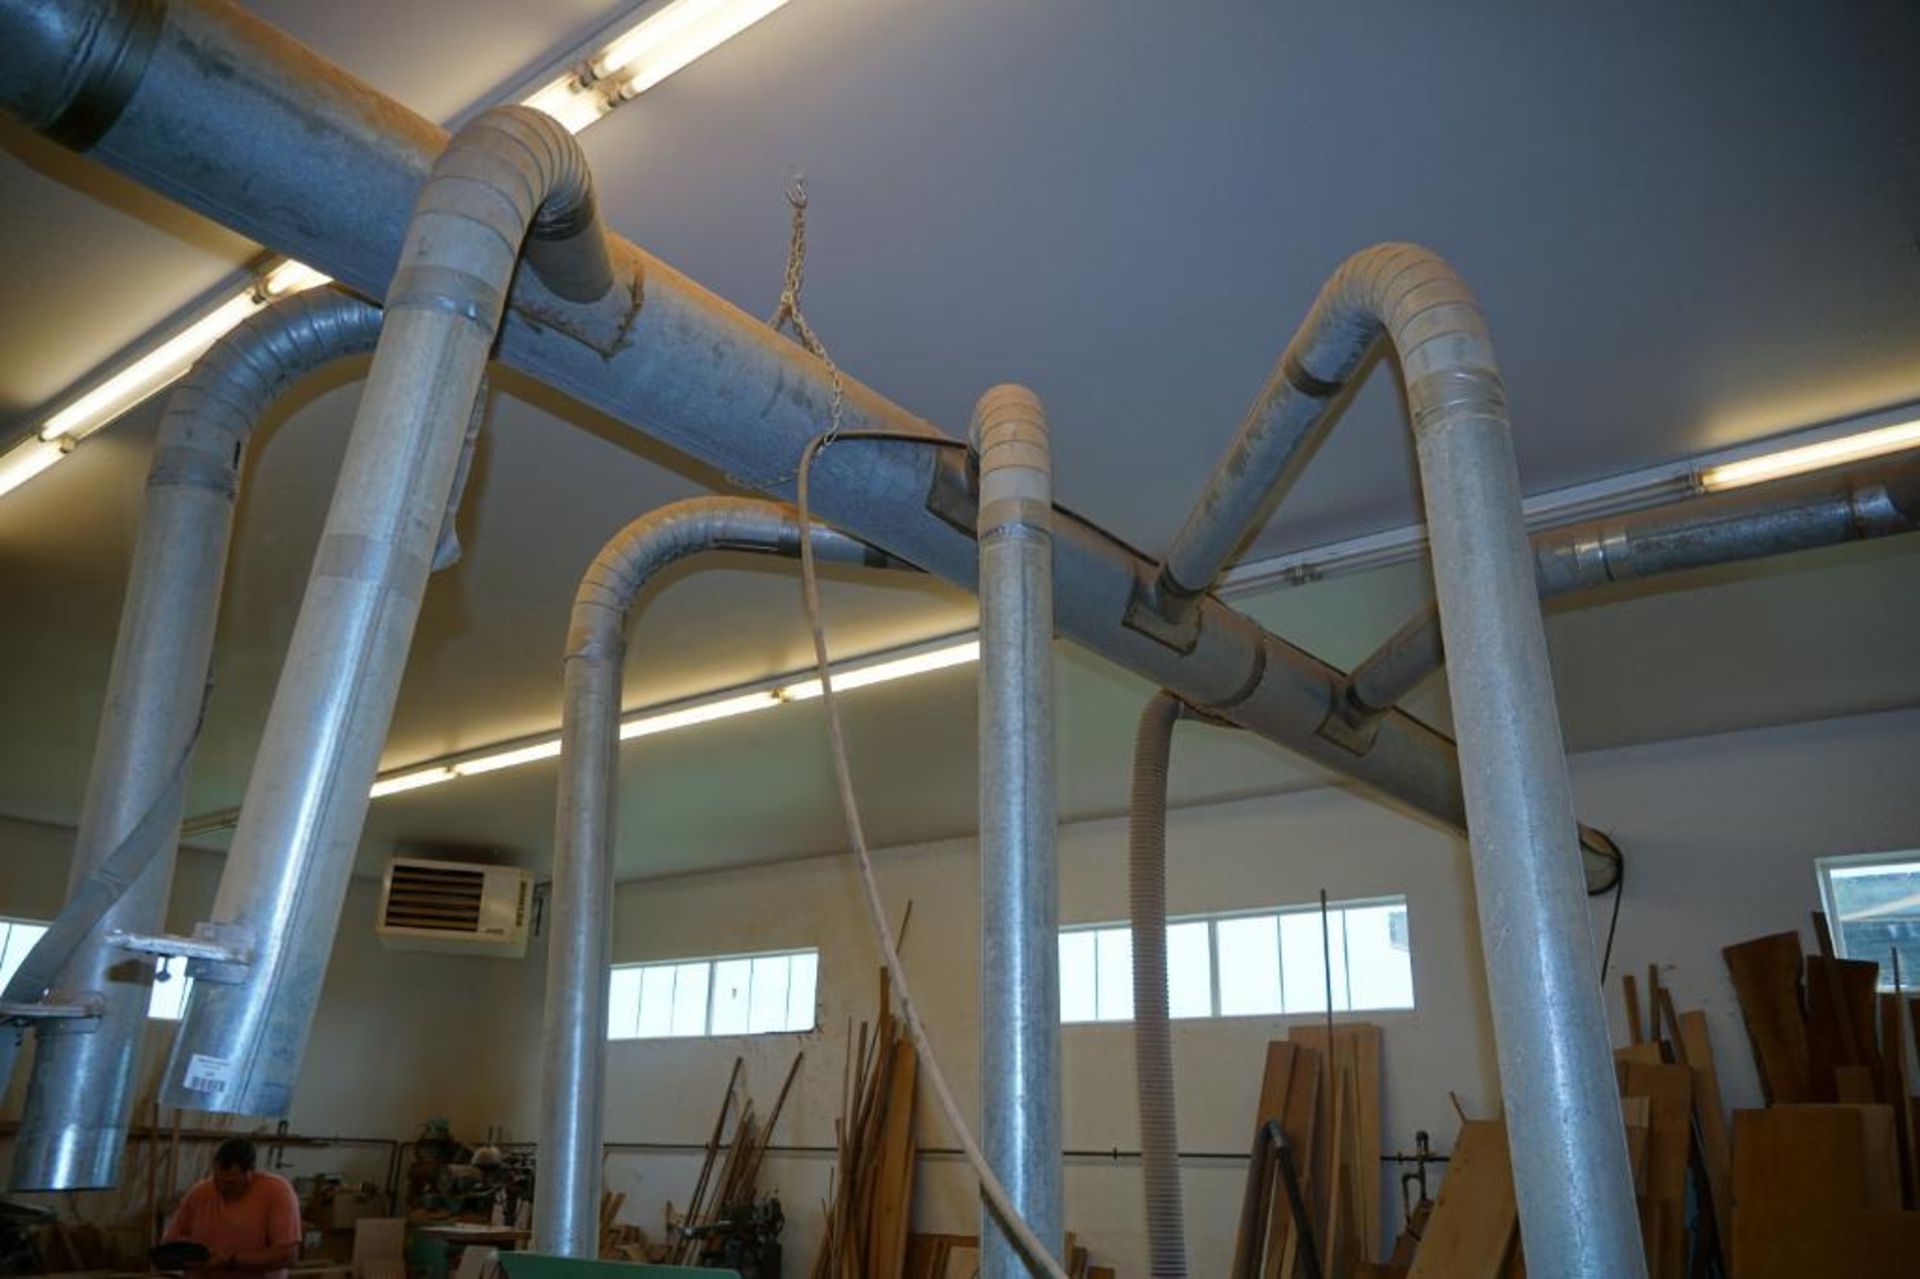 All Dust Pipe on Inside - Image 2 of 3